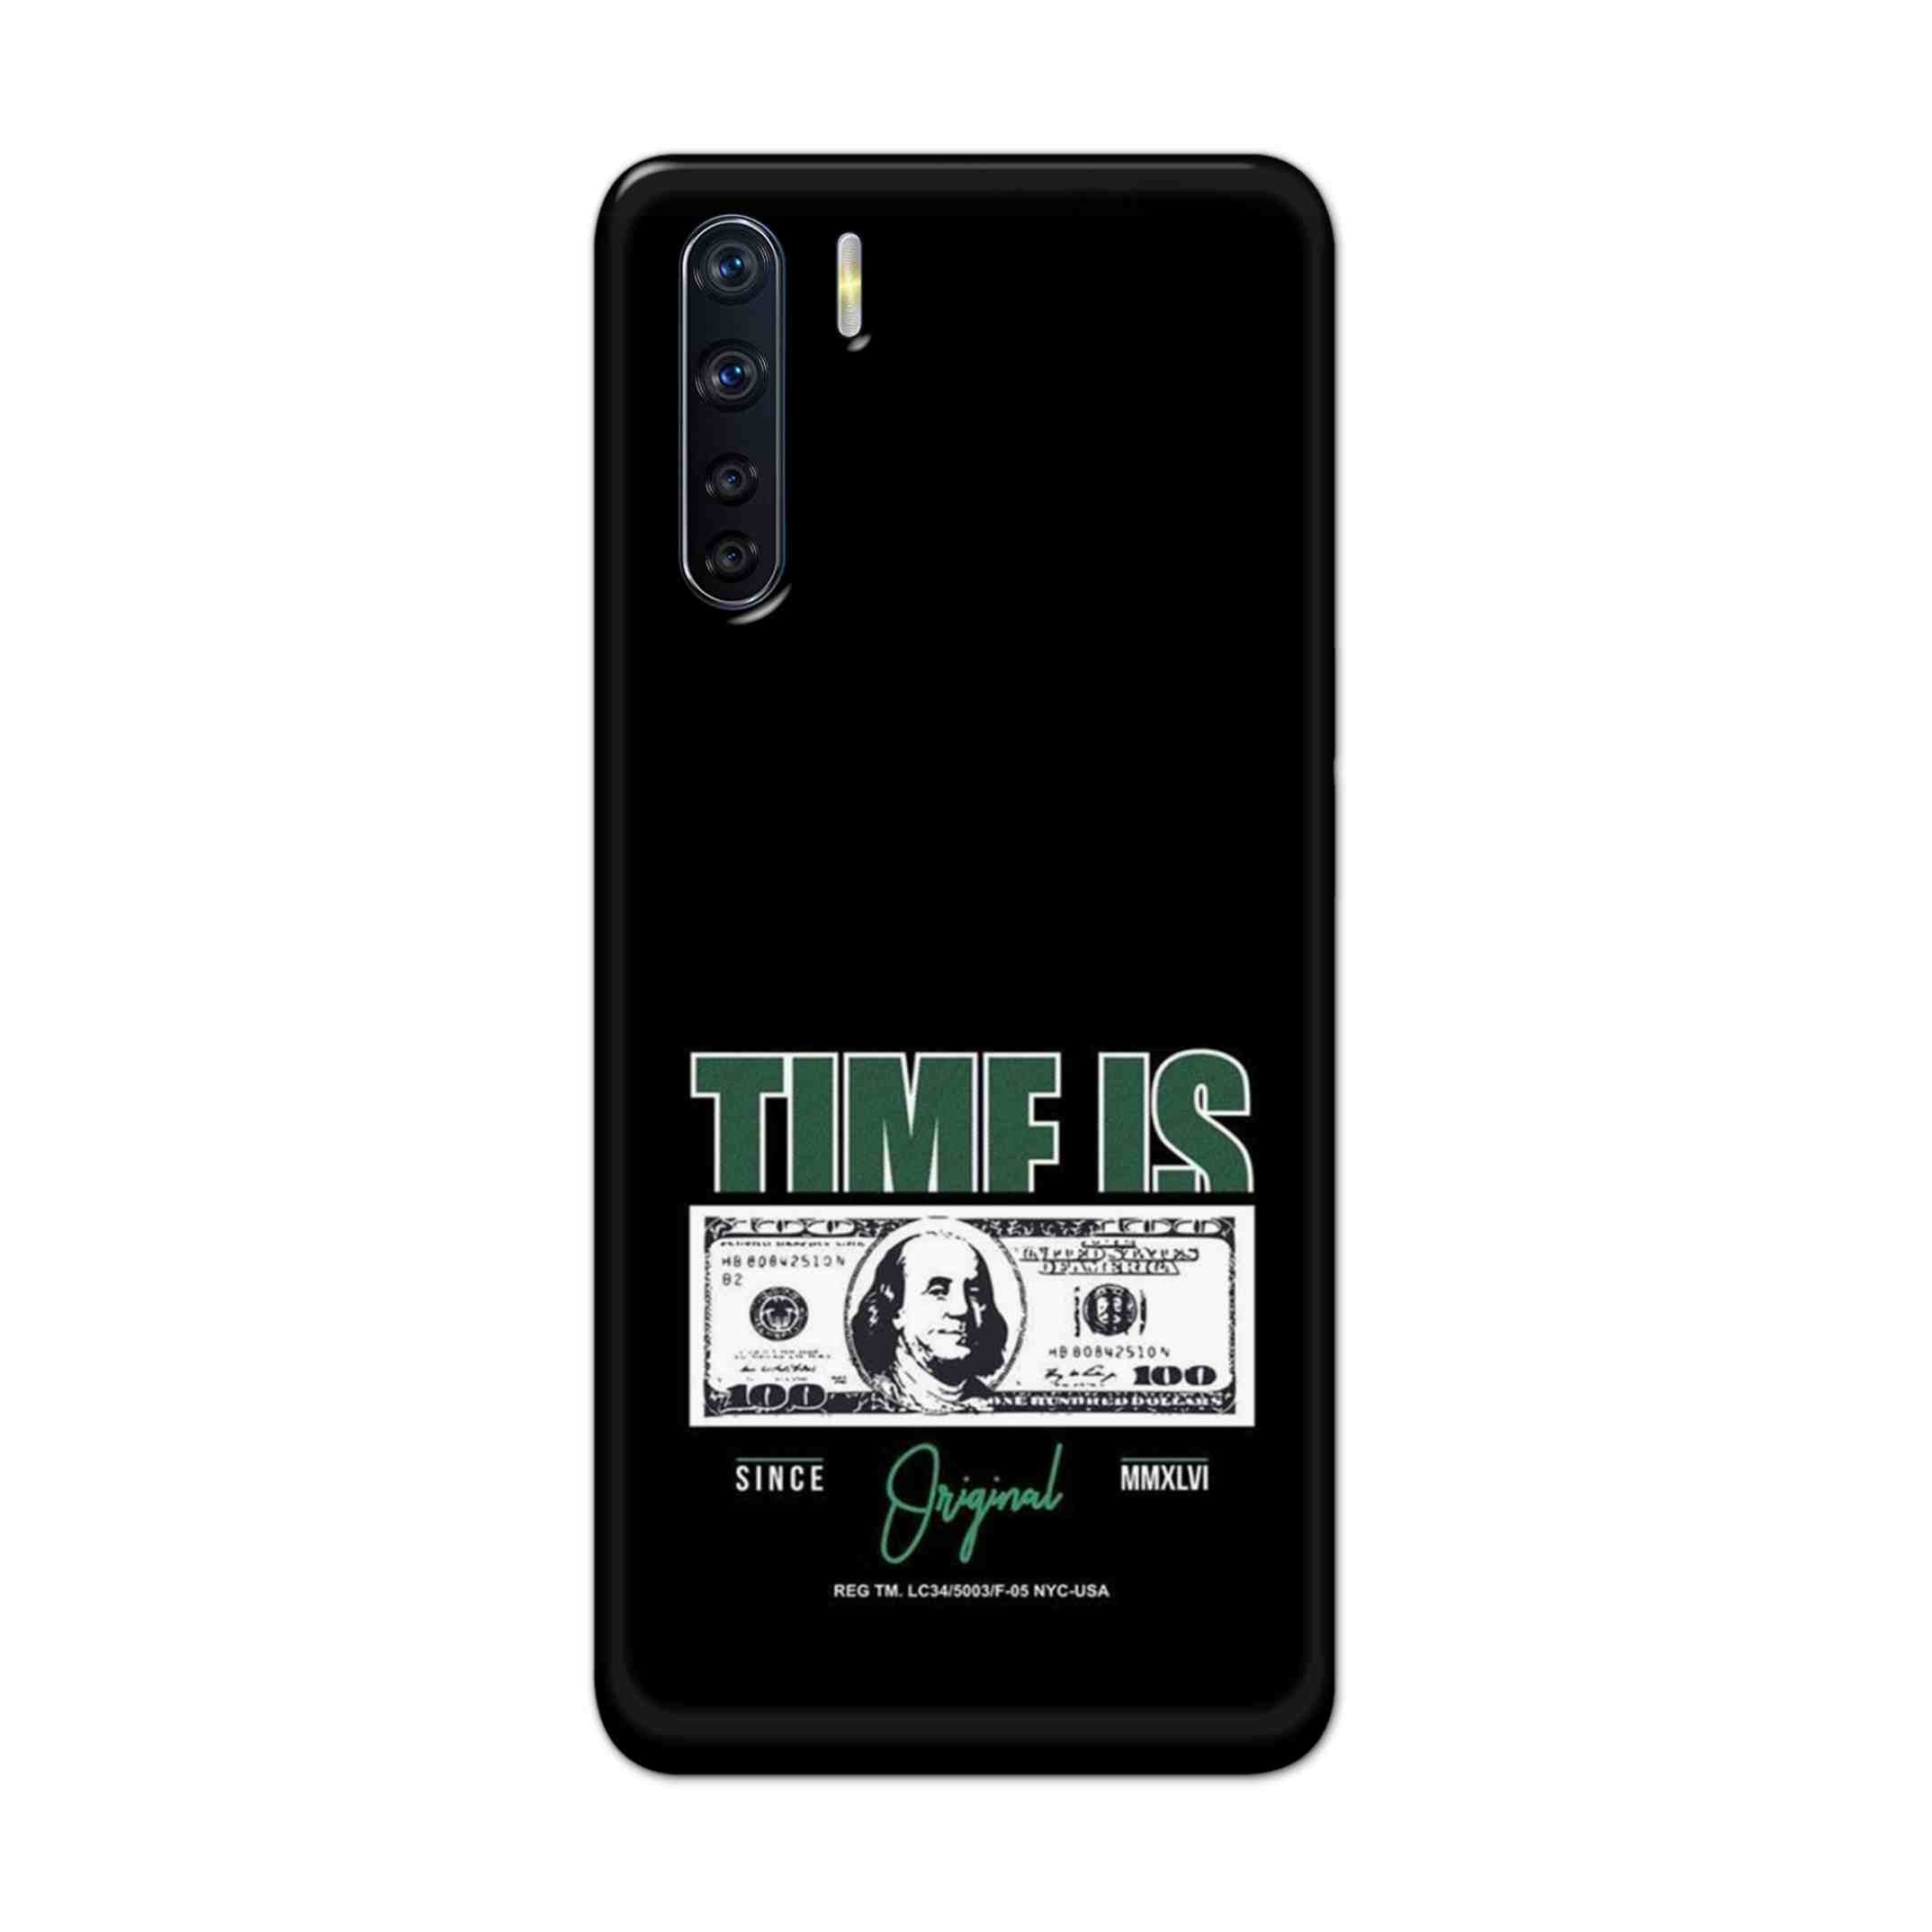 Buy Time Is Money Hard Back Mobile Phone Case Cover For OPPO F15 Online